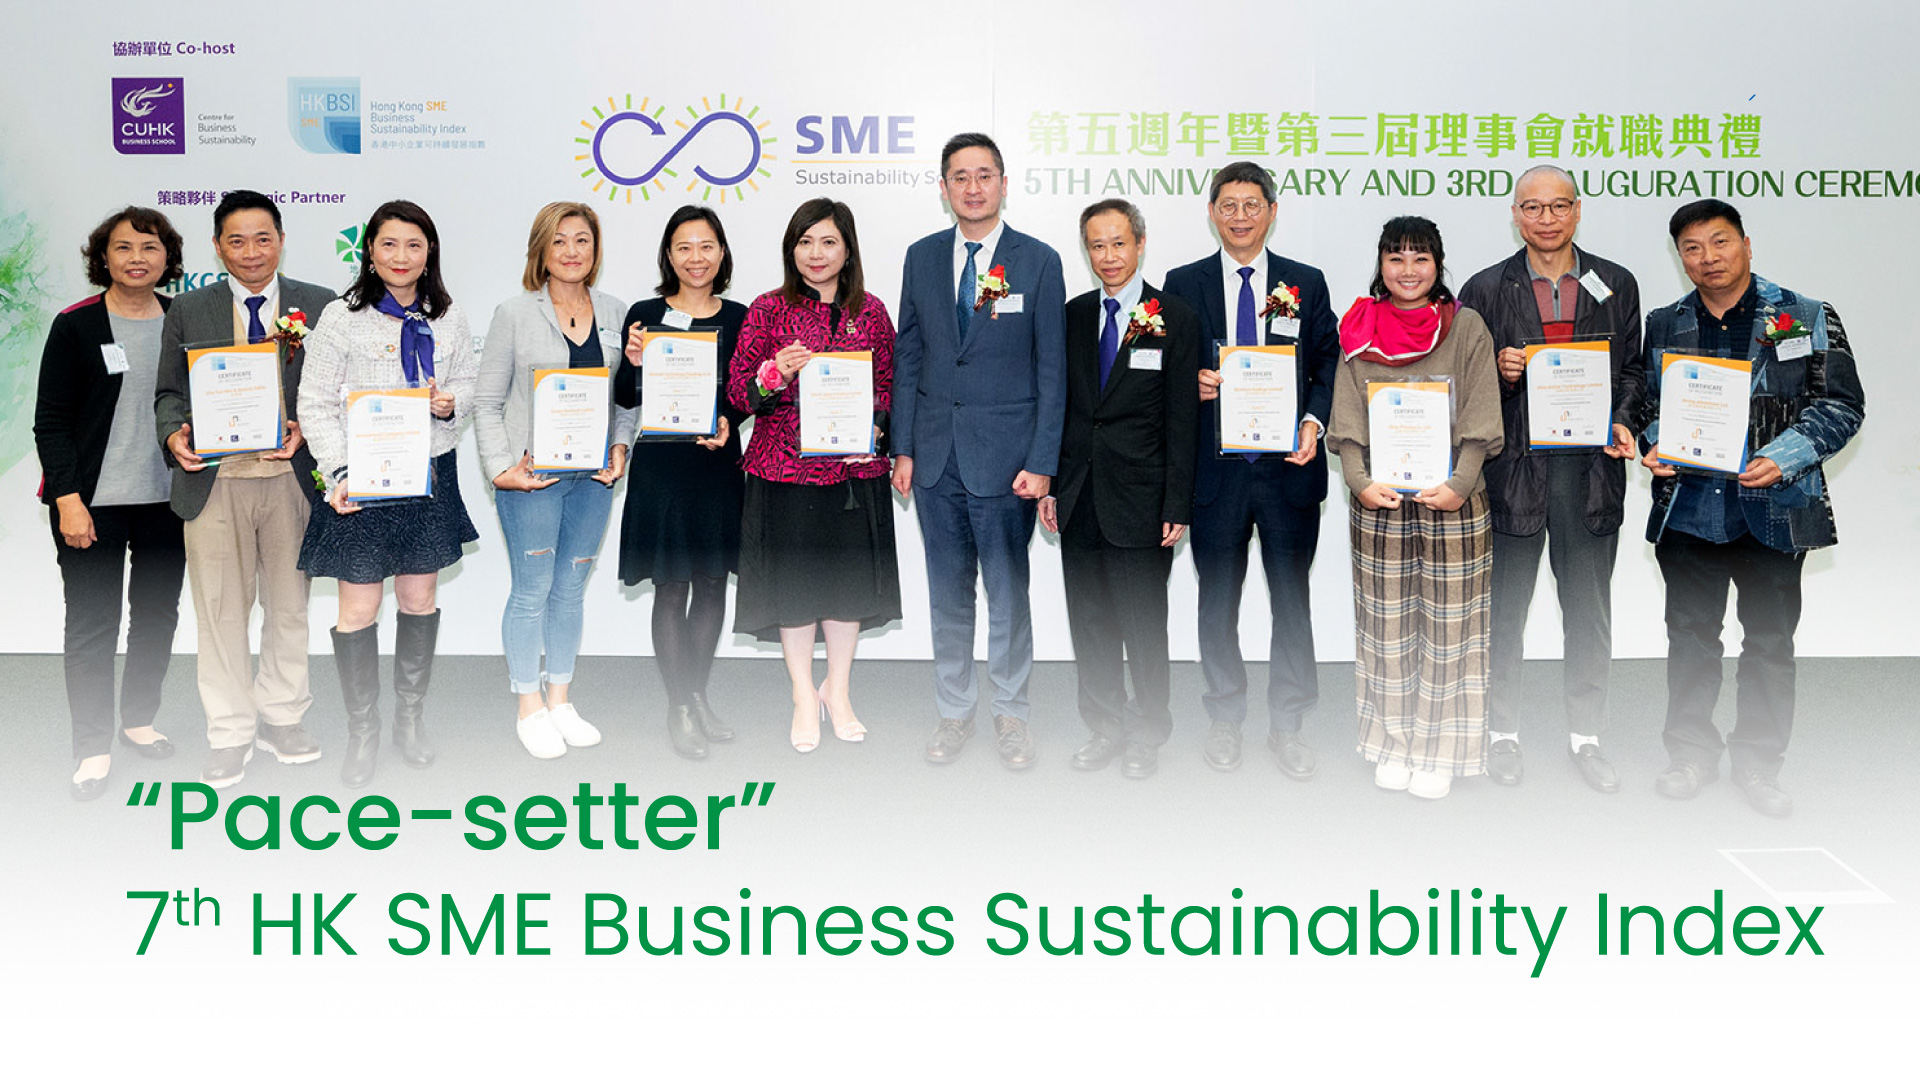 UAT is awarded “Pace-setter” in the 7th HK SME Business Sustainability Index 